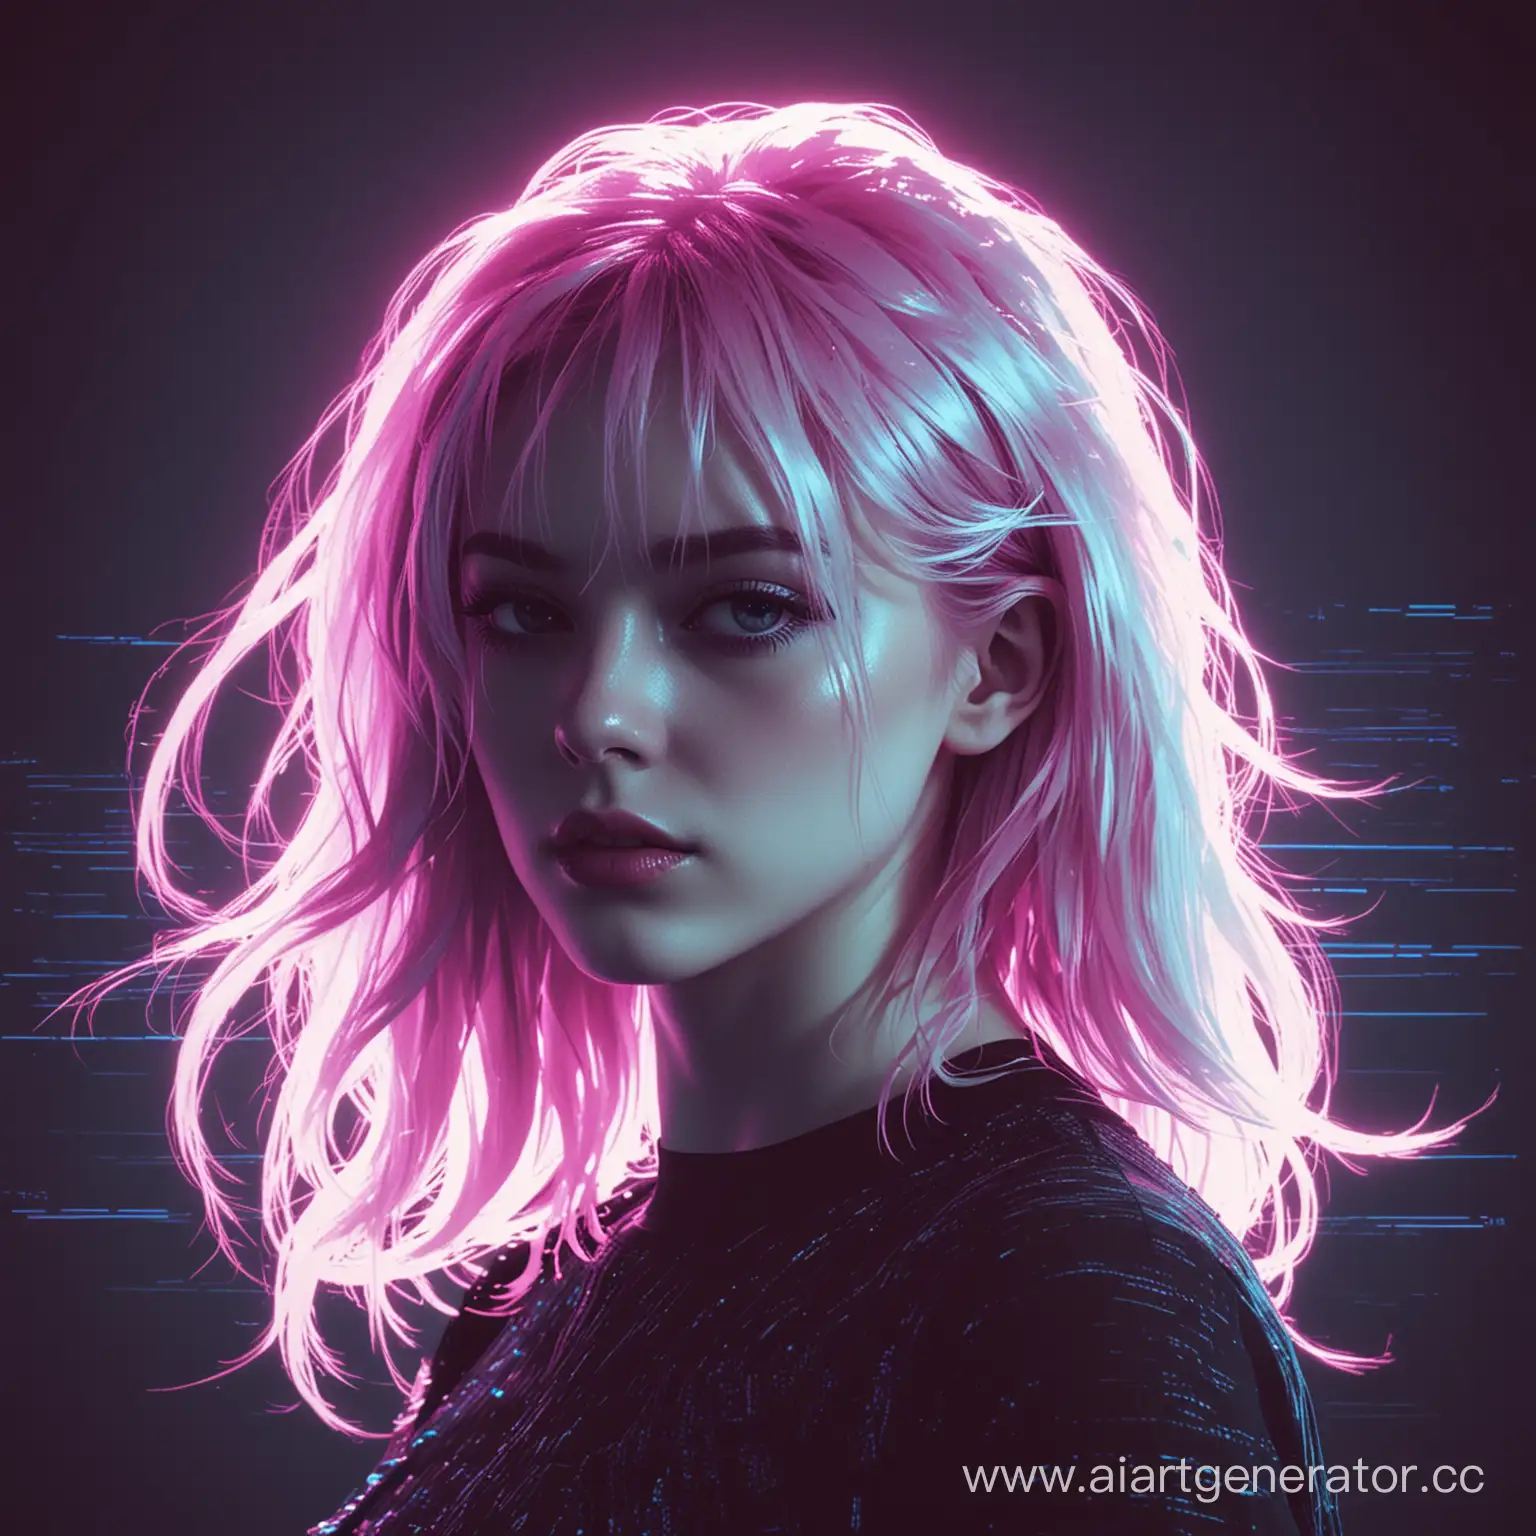 aesthetics white silhouette of a girl, retro glitch effect, waves of glitches and pixels, pink-blue filter, goth dark style